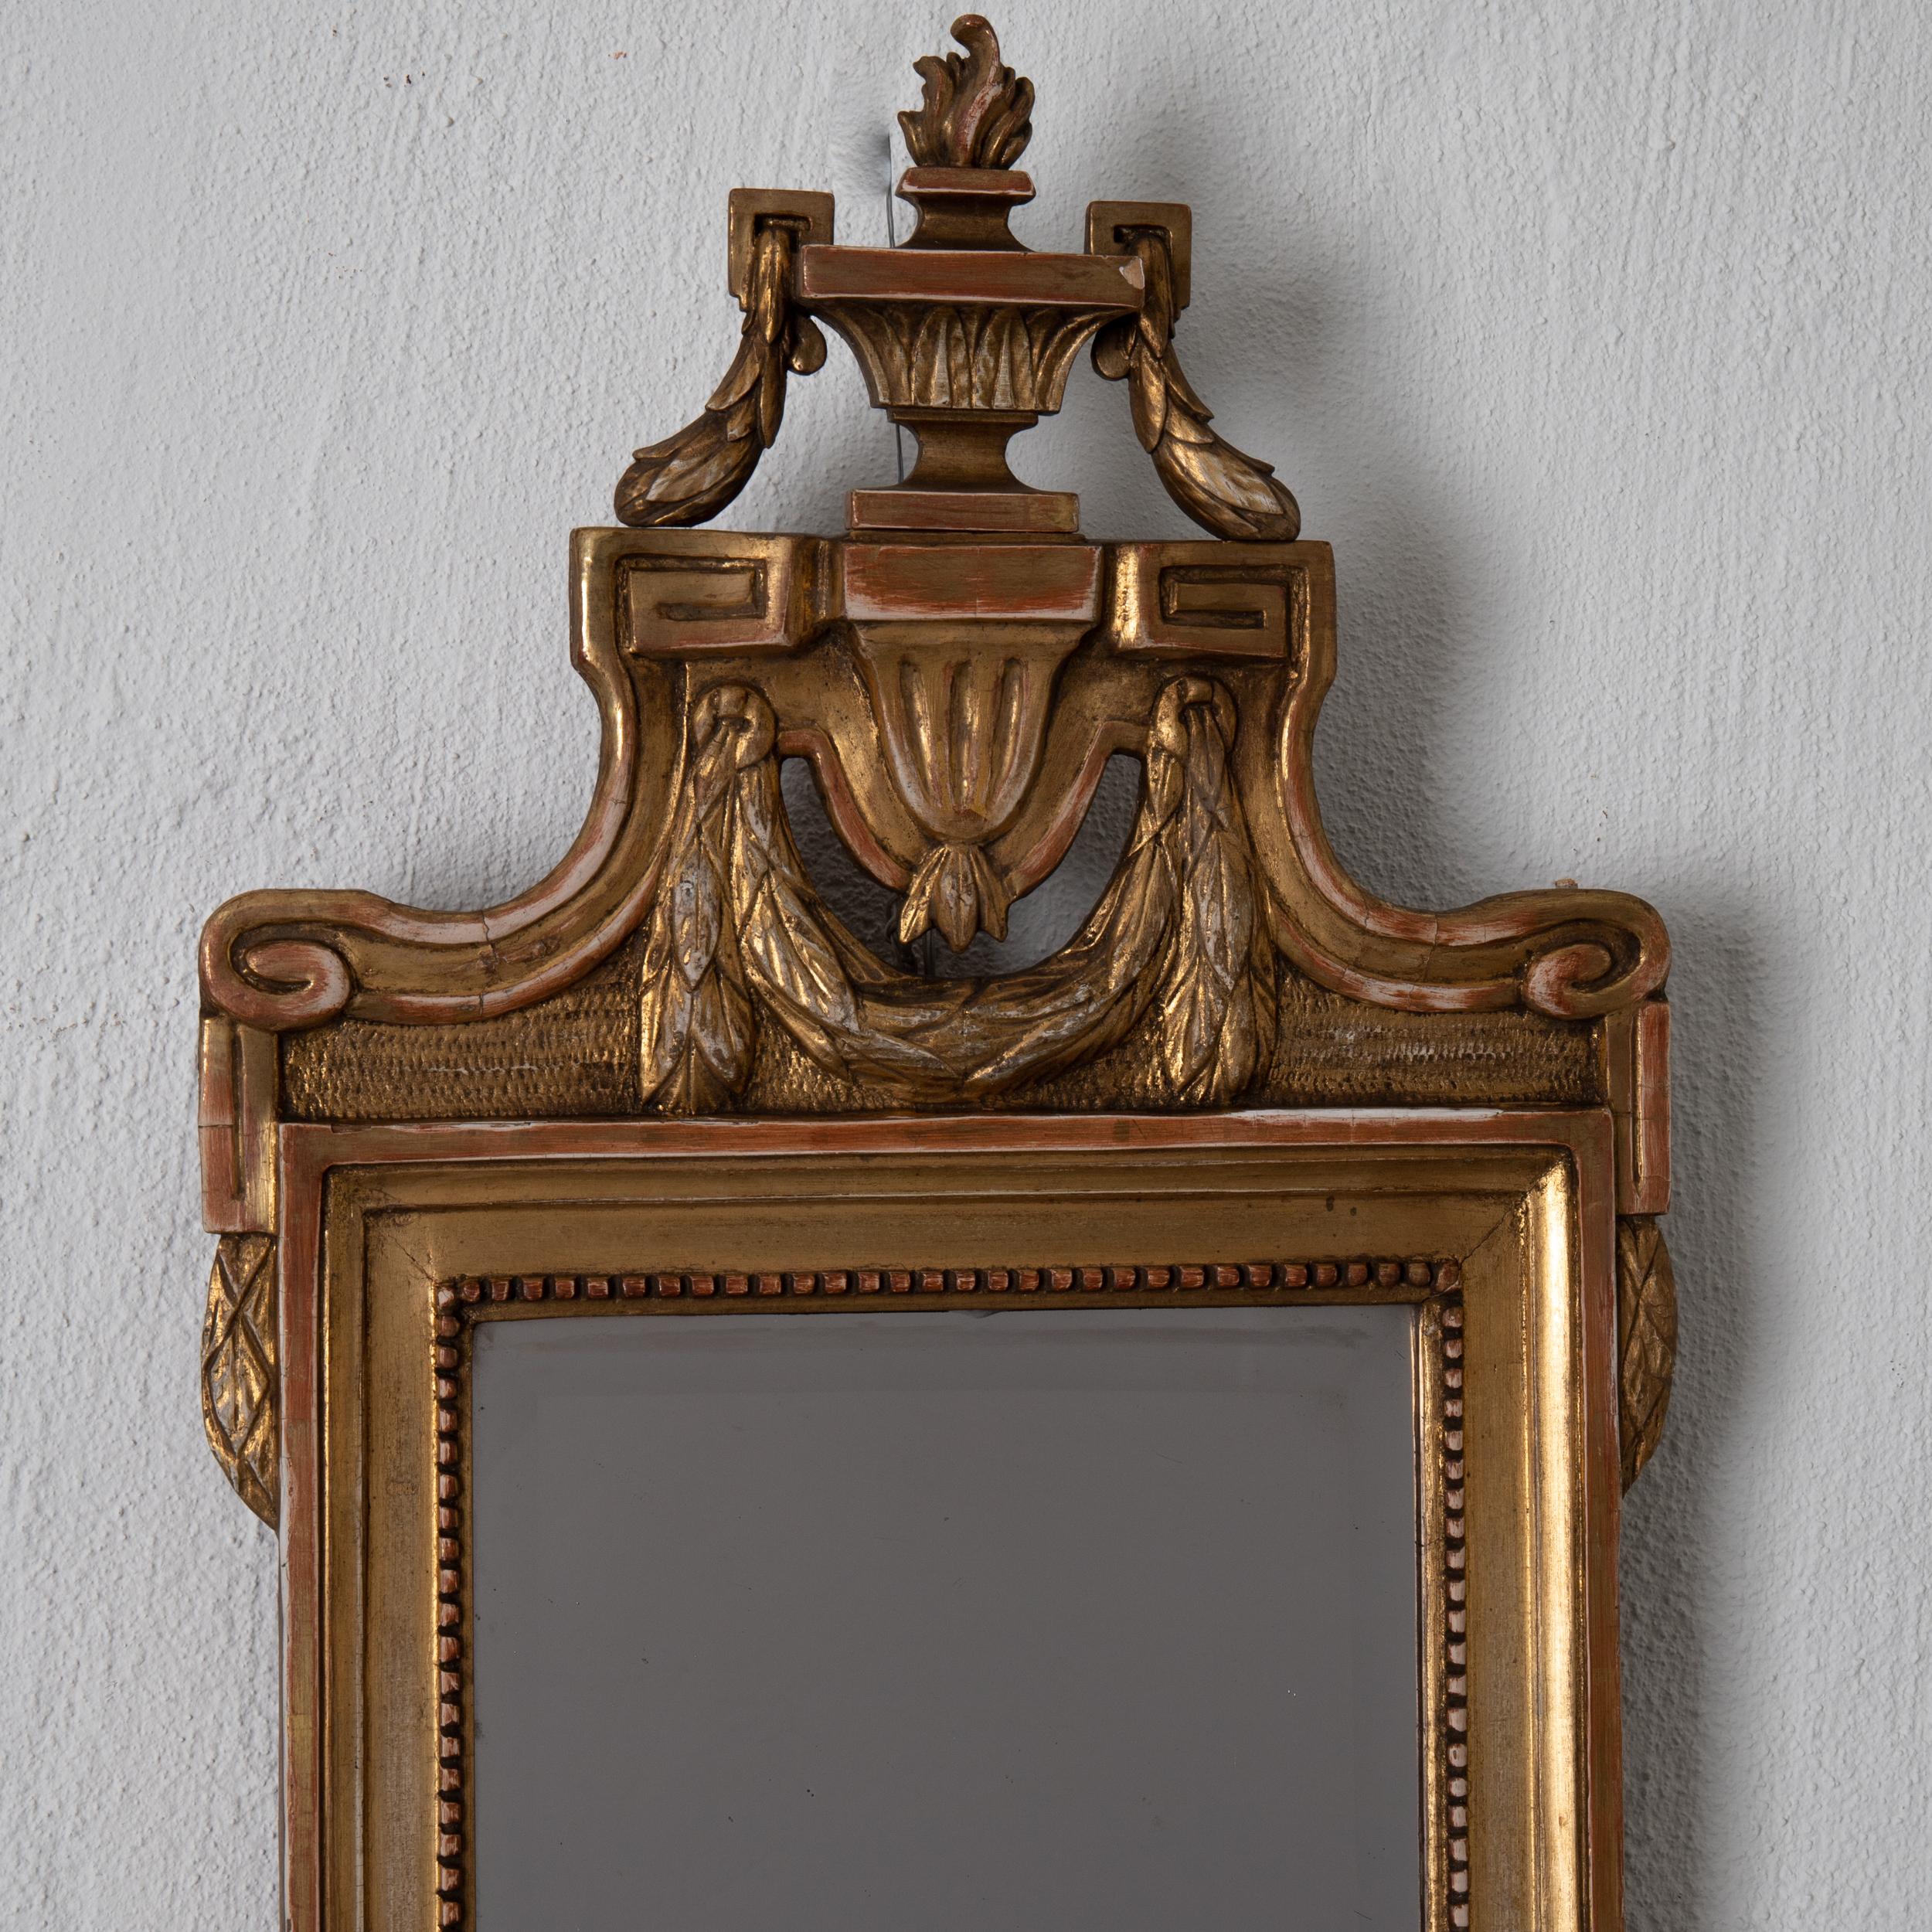 Mirror wall Swedish Gustavian gilded, Sweden. A gorgeous mirror made during the Gustavian period 1775-1810 in Sweden. Gustavian details such as the urn and laurel swags. Signed by mirror maker Niclas Falkengren, Jönkoping, Sweden, 1750-1813.
 